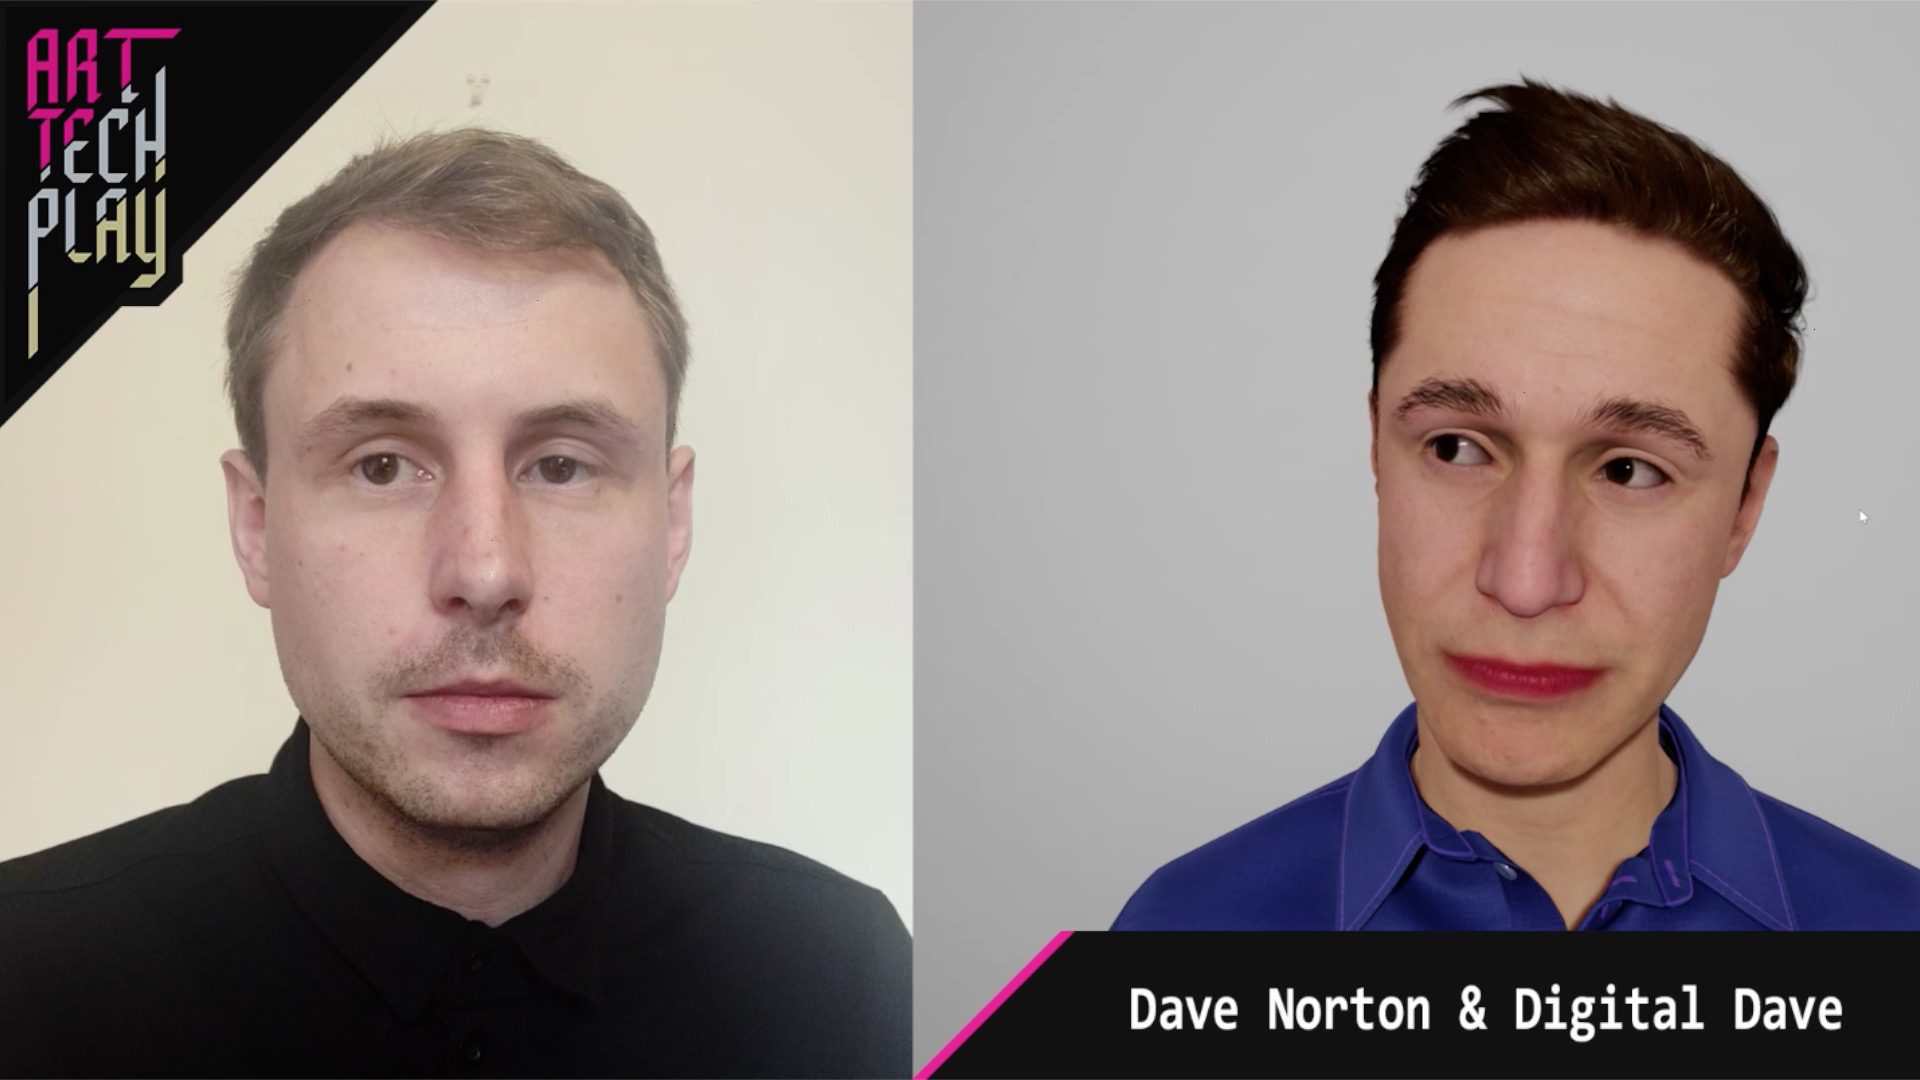 Dave Norton on creating a motion capture system